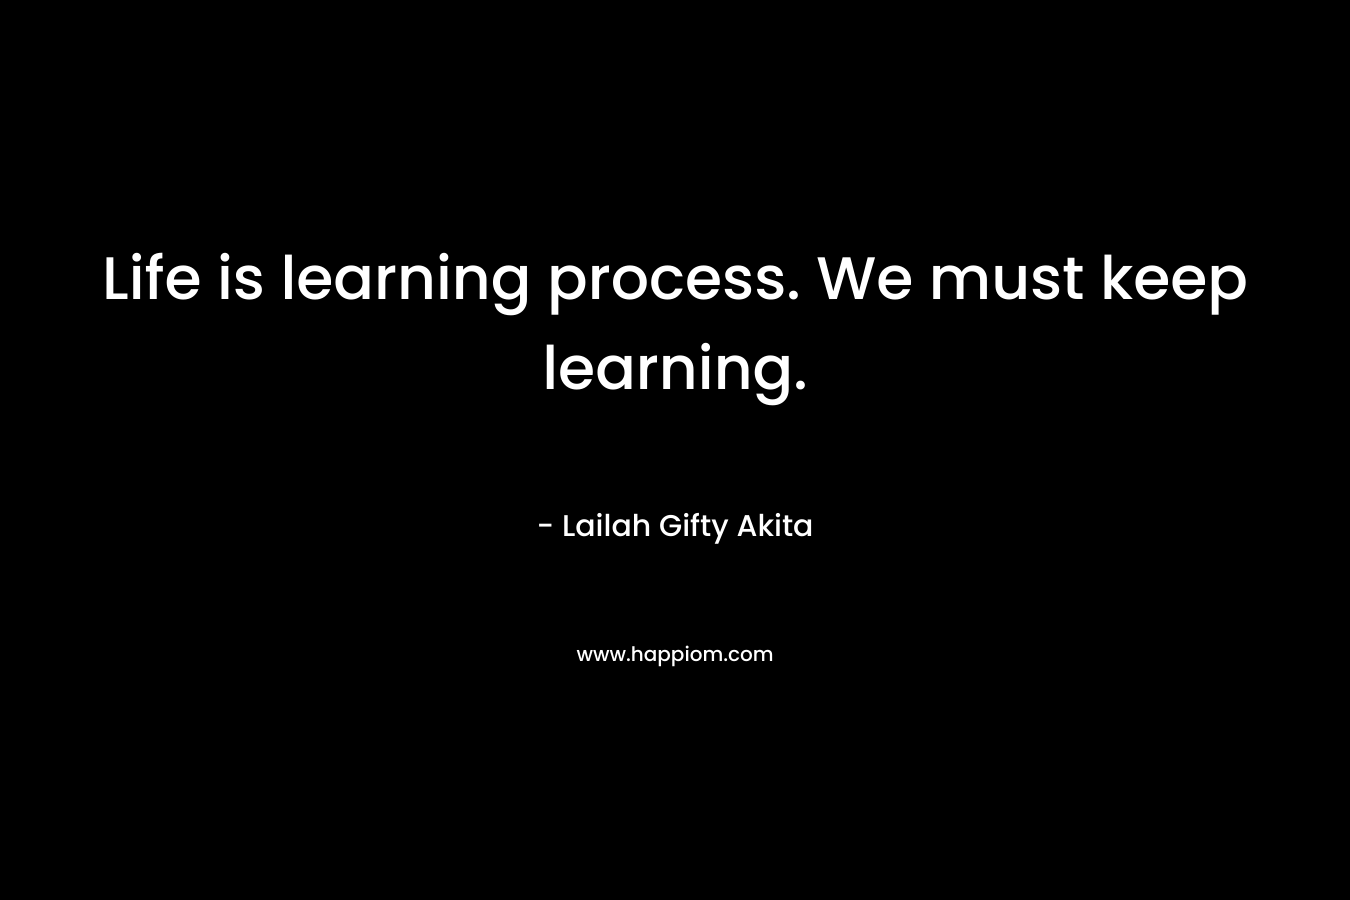 Life is learning process. We must keep learning.